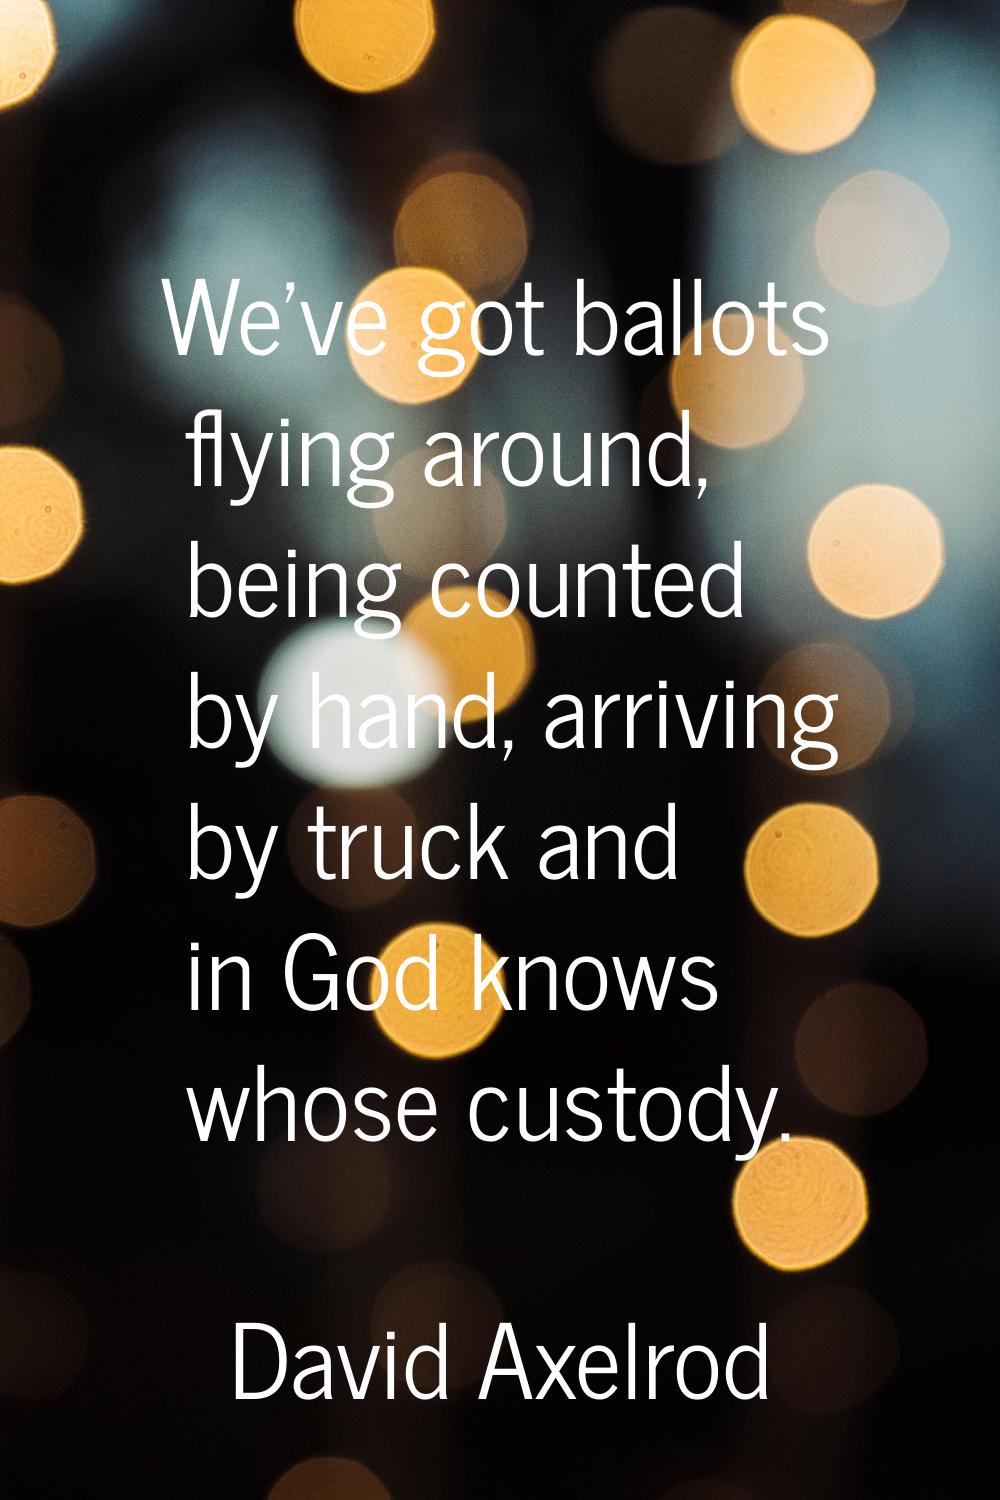 We've got ballots flying around, being counted by hand, arriving by truck and in God knows whose cu